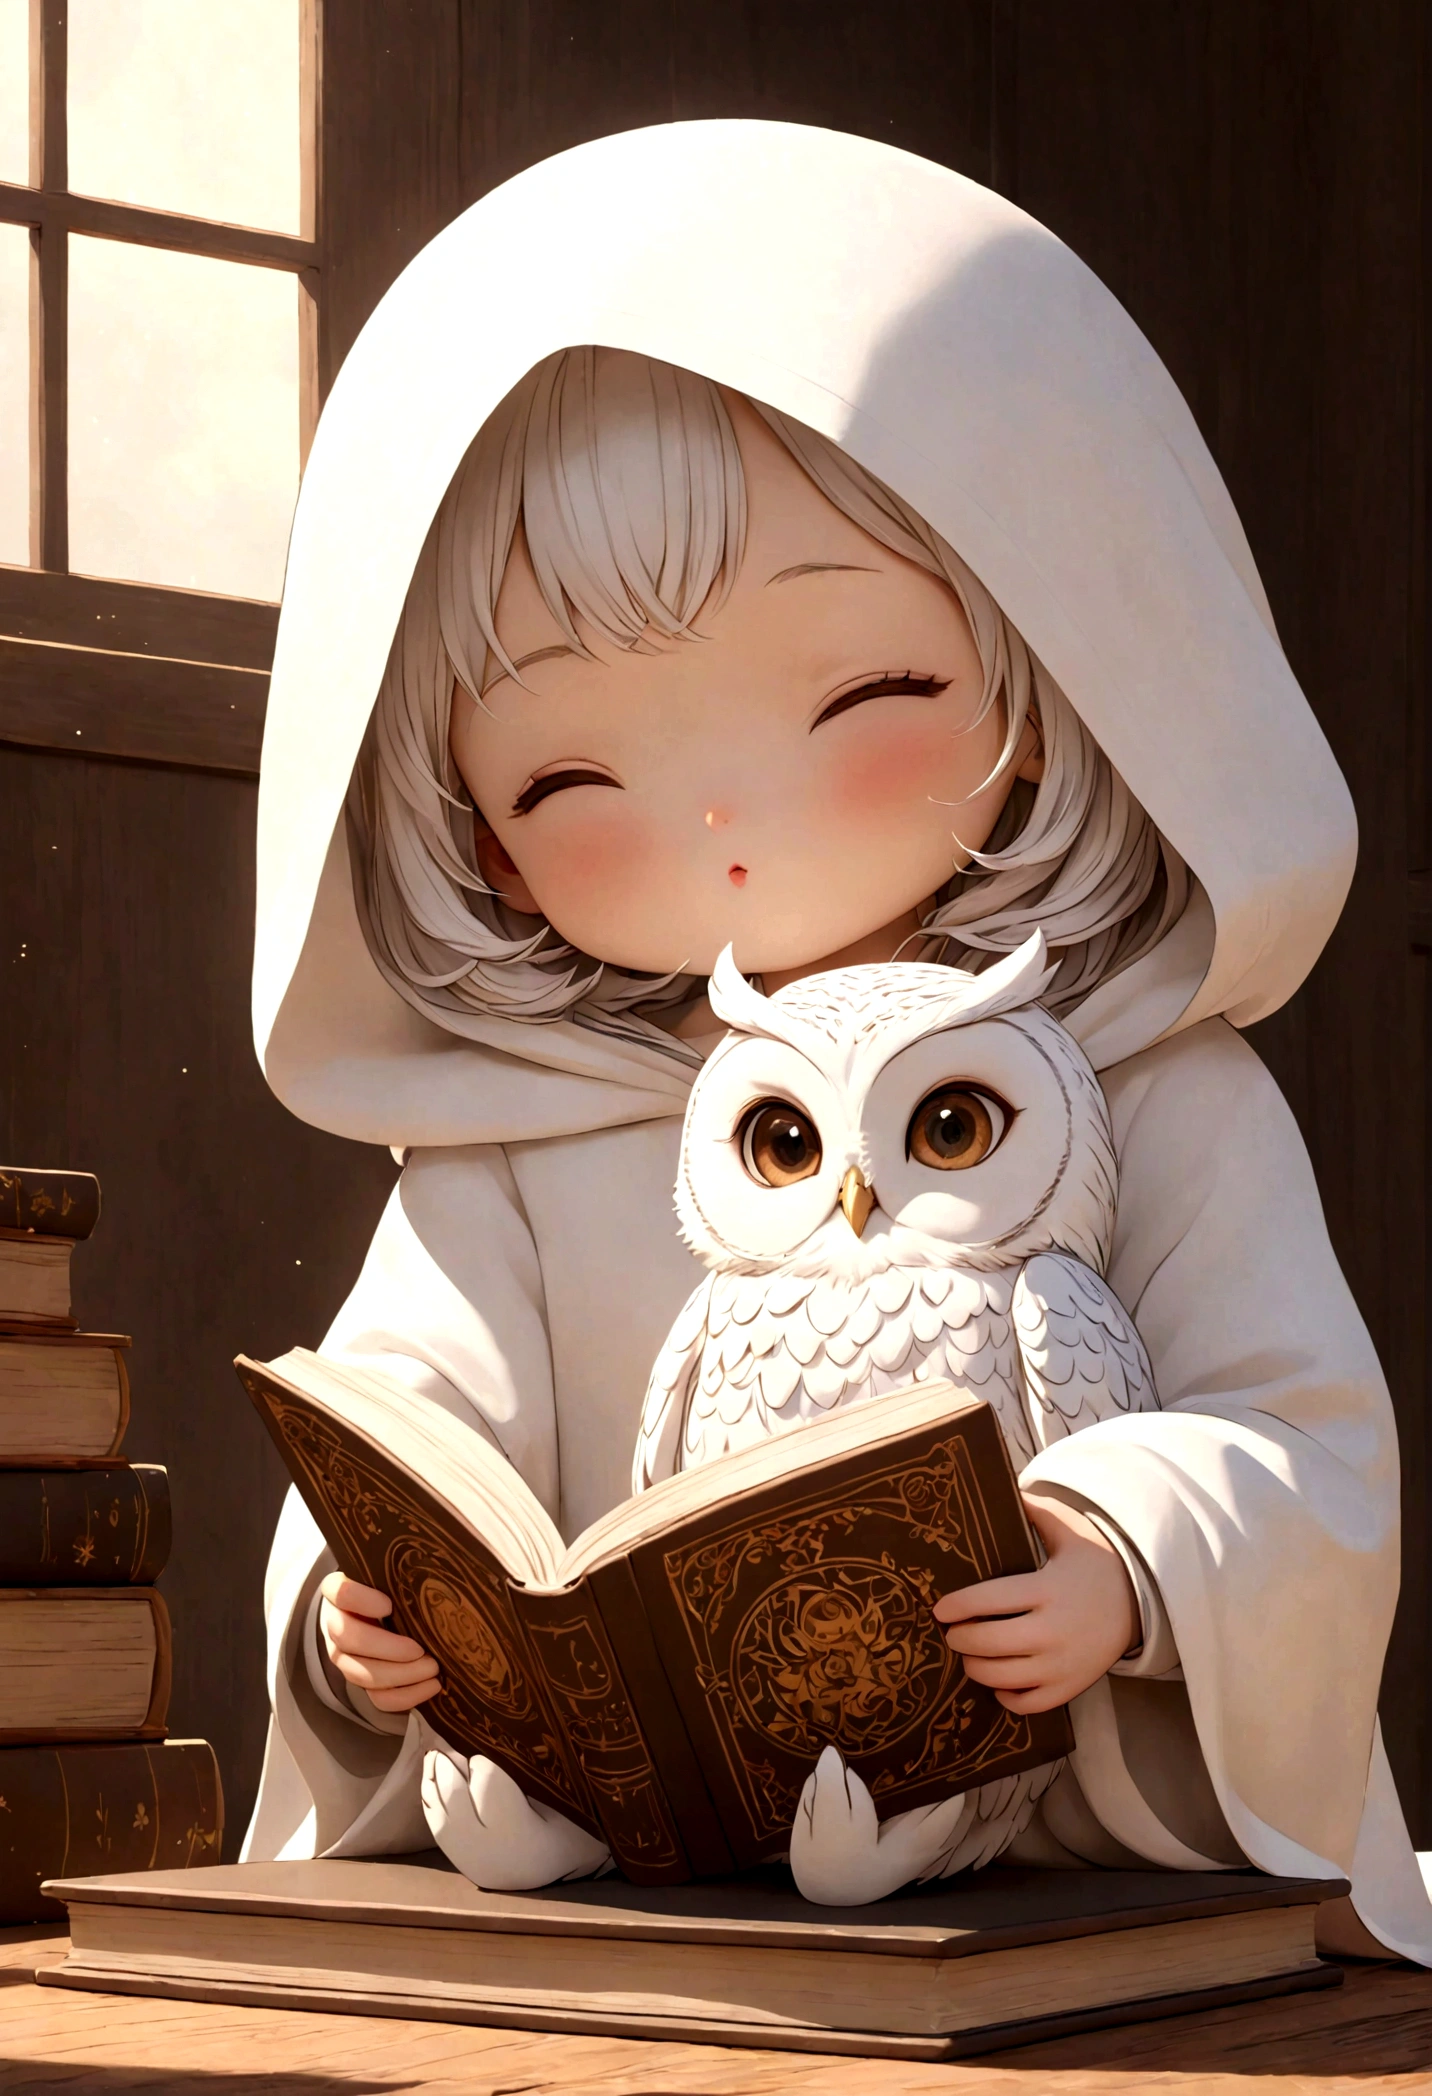  Create a vibrant fantasy and cute scene in a super-detailed animation style. A white owl in a white hood reads a book at the table without seeing its feet.( Perfect anatomical structure )Background laboratory calm and peaceful very cute white owl is reading a book cartoon 3d style   (masterpiece),Realistic masterpiece (best quality), (Ultra-high detail)

                   Very cute white owl doll stunning artwork super detailed digital art